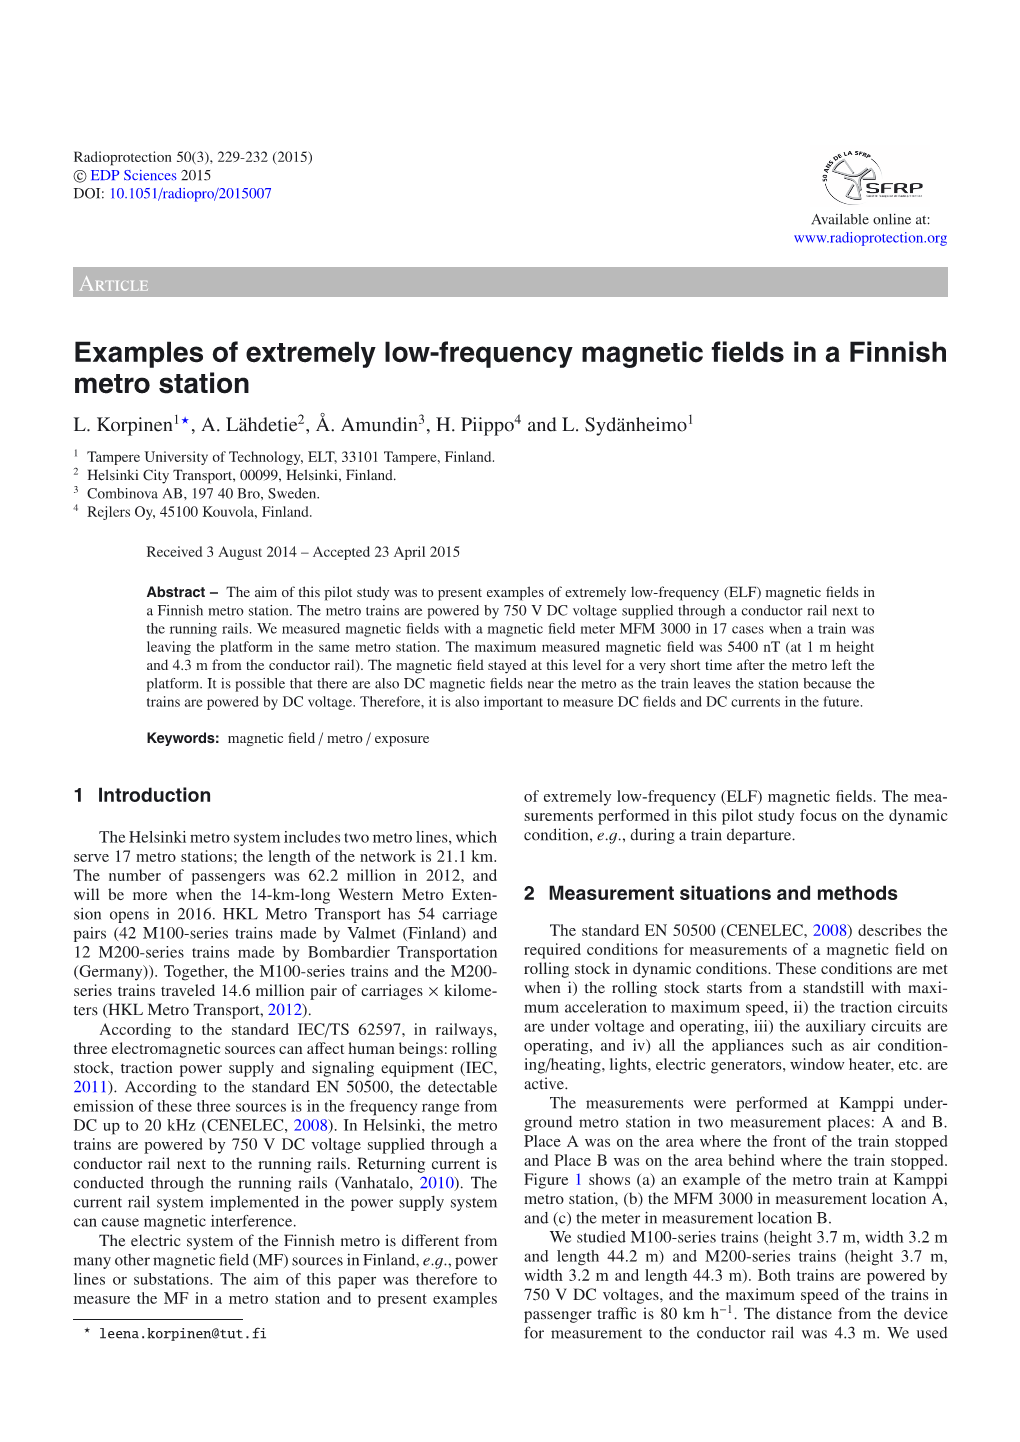 Examples of Extremely Low-Frequency Magnetic Fields in a Finnish Metro